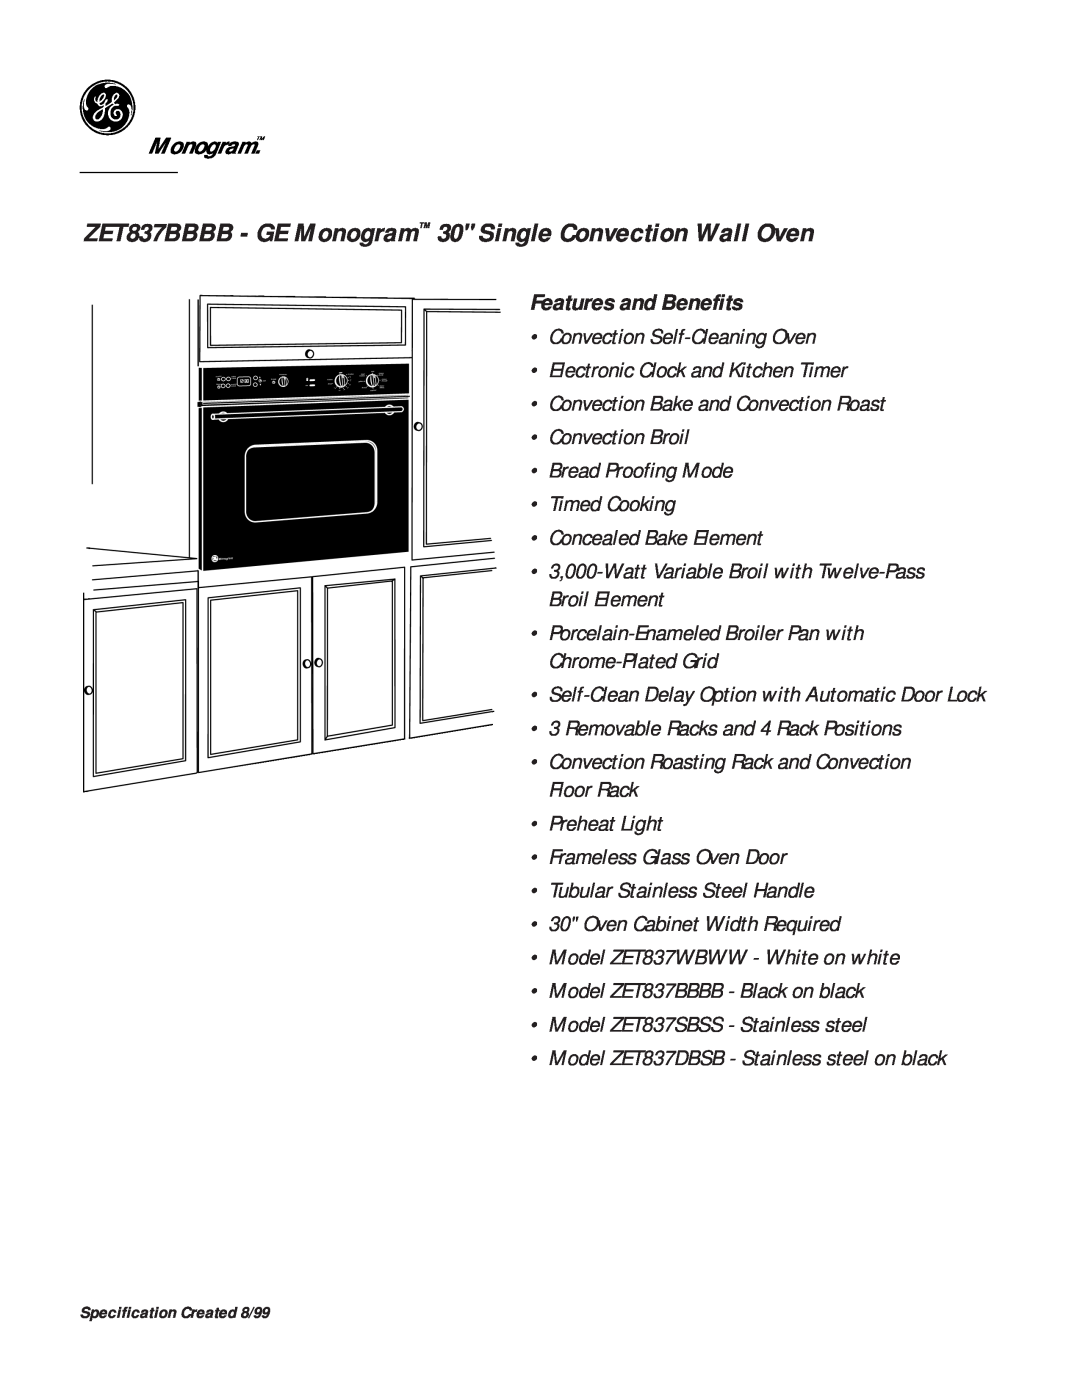 GE Monogram dimensions Features and Benefits, ZET837BBBB - GE Monogram 30 Single Convection Wall Oven 